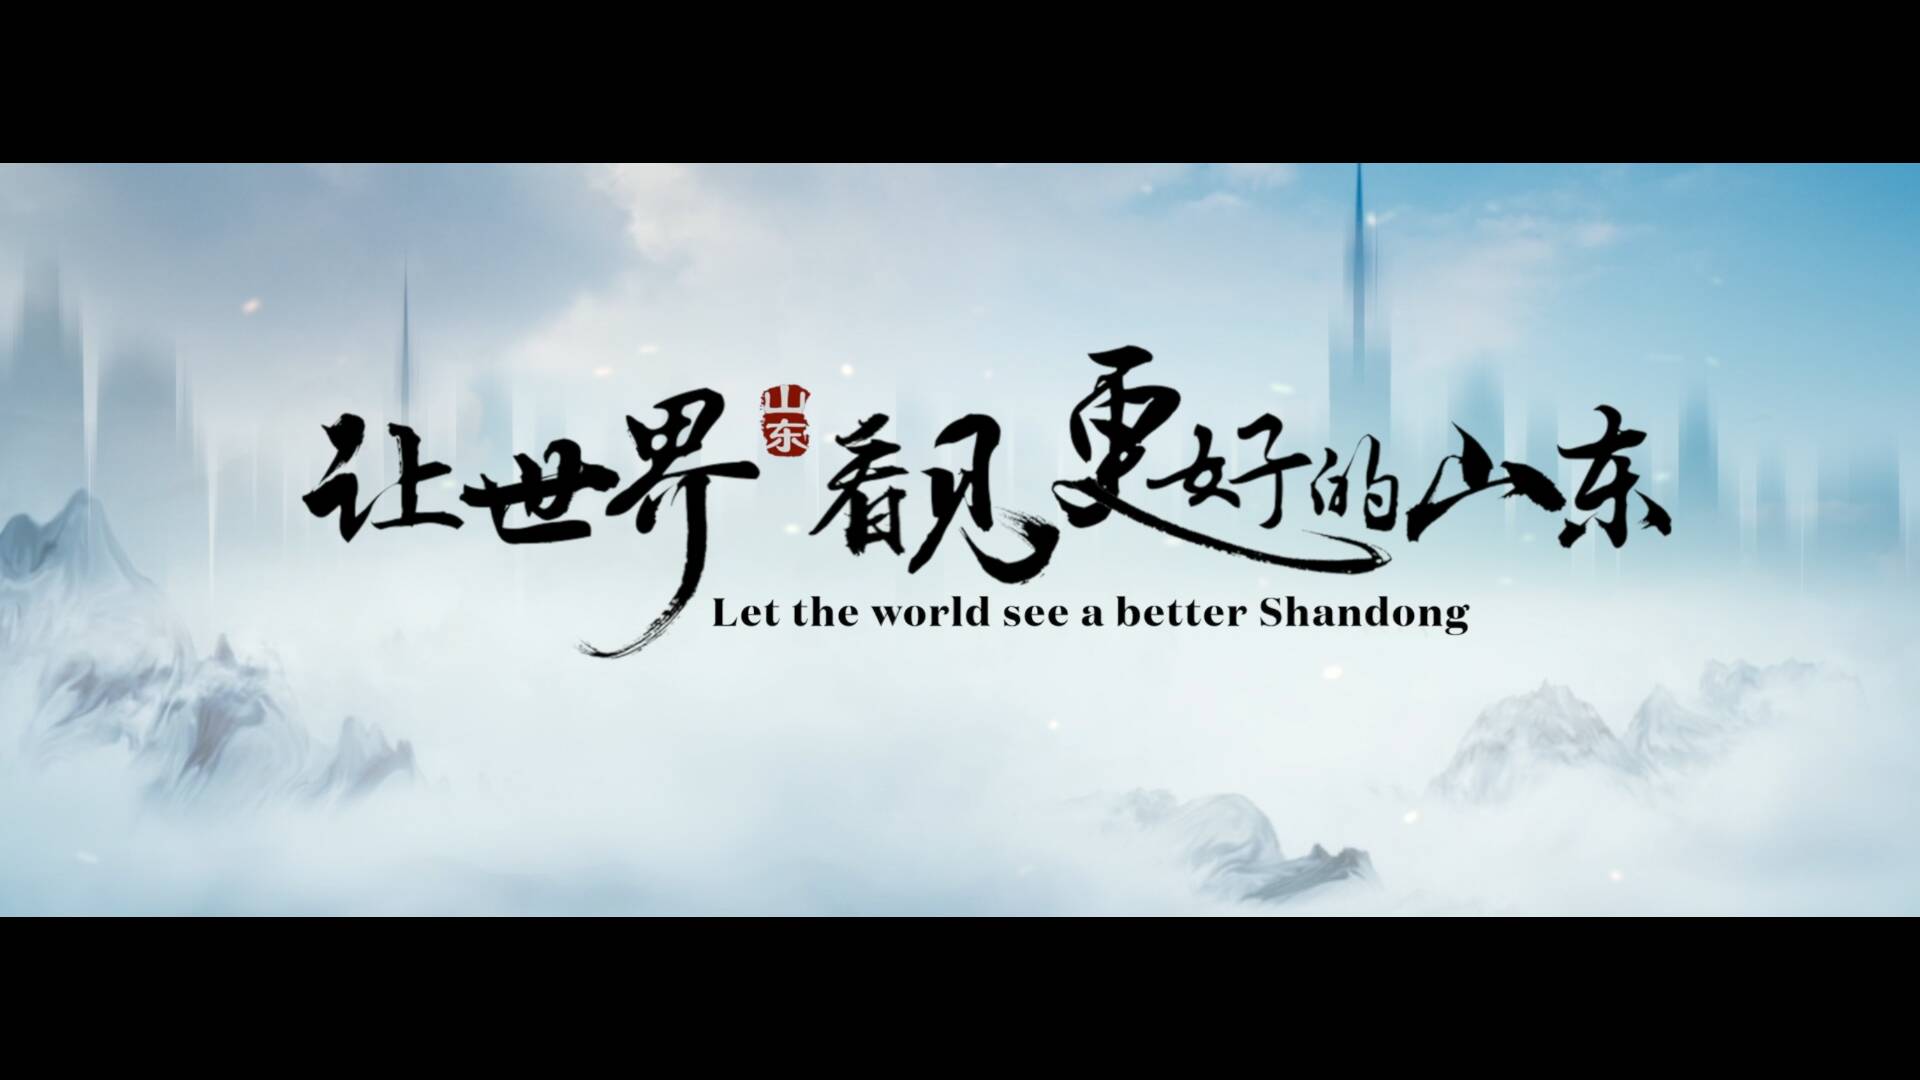 Let the world see a better Shandong！